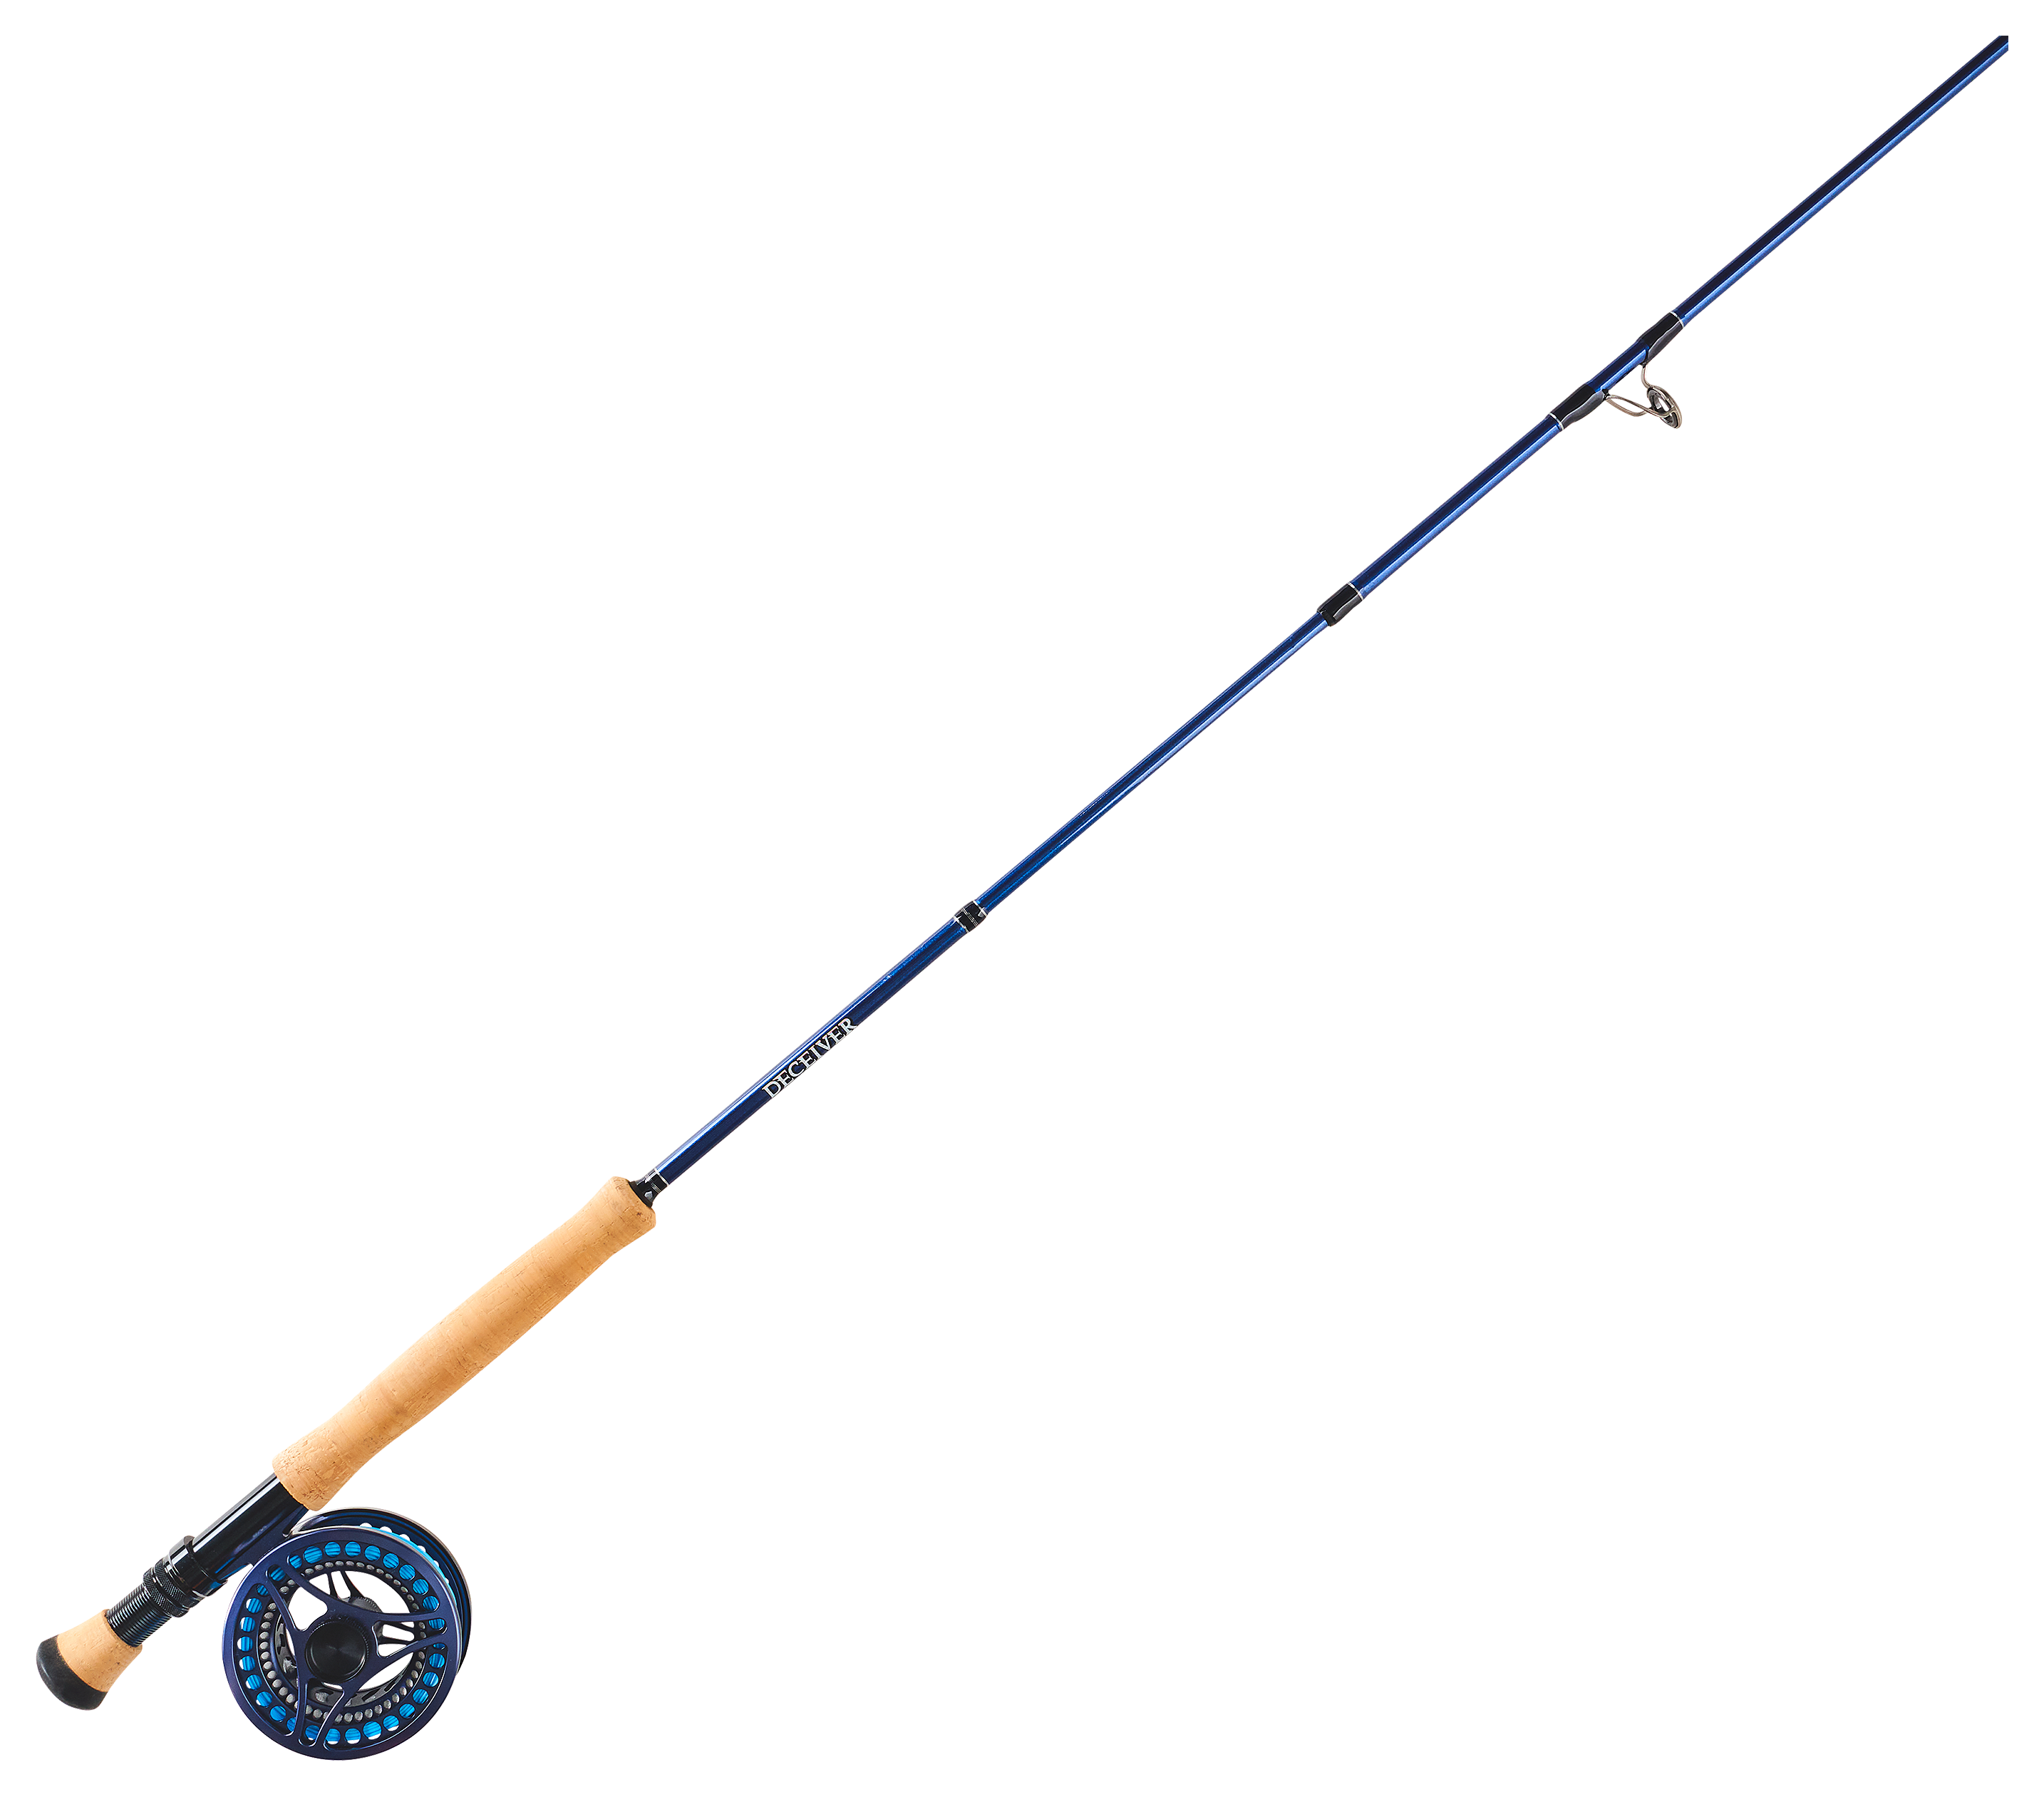 Fly Fishing Rods and Reels, Fly Fishing Outfits